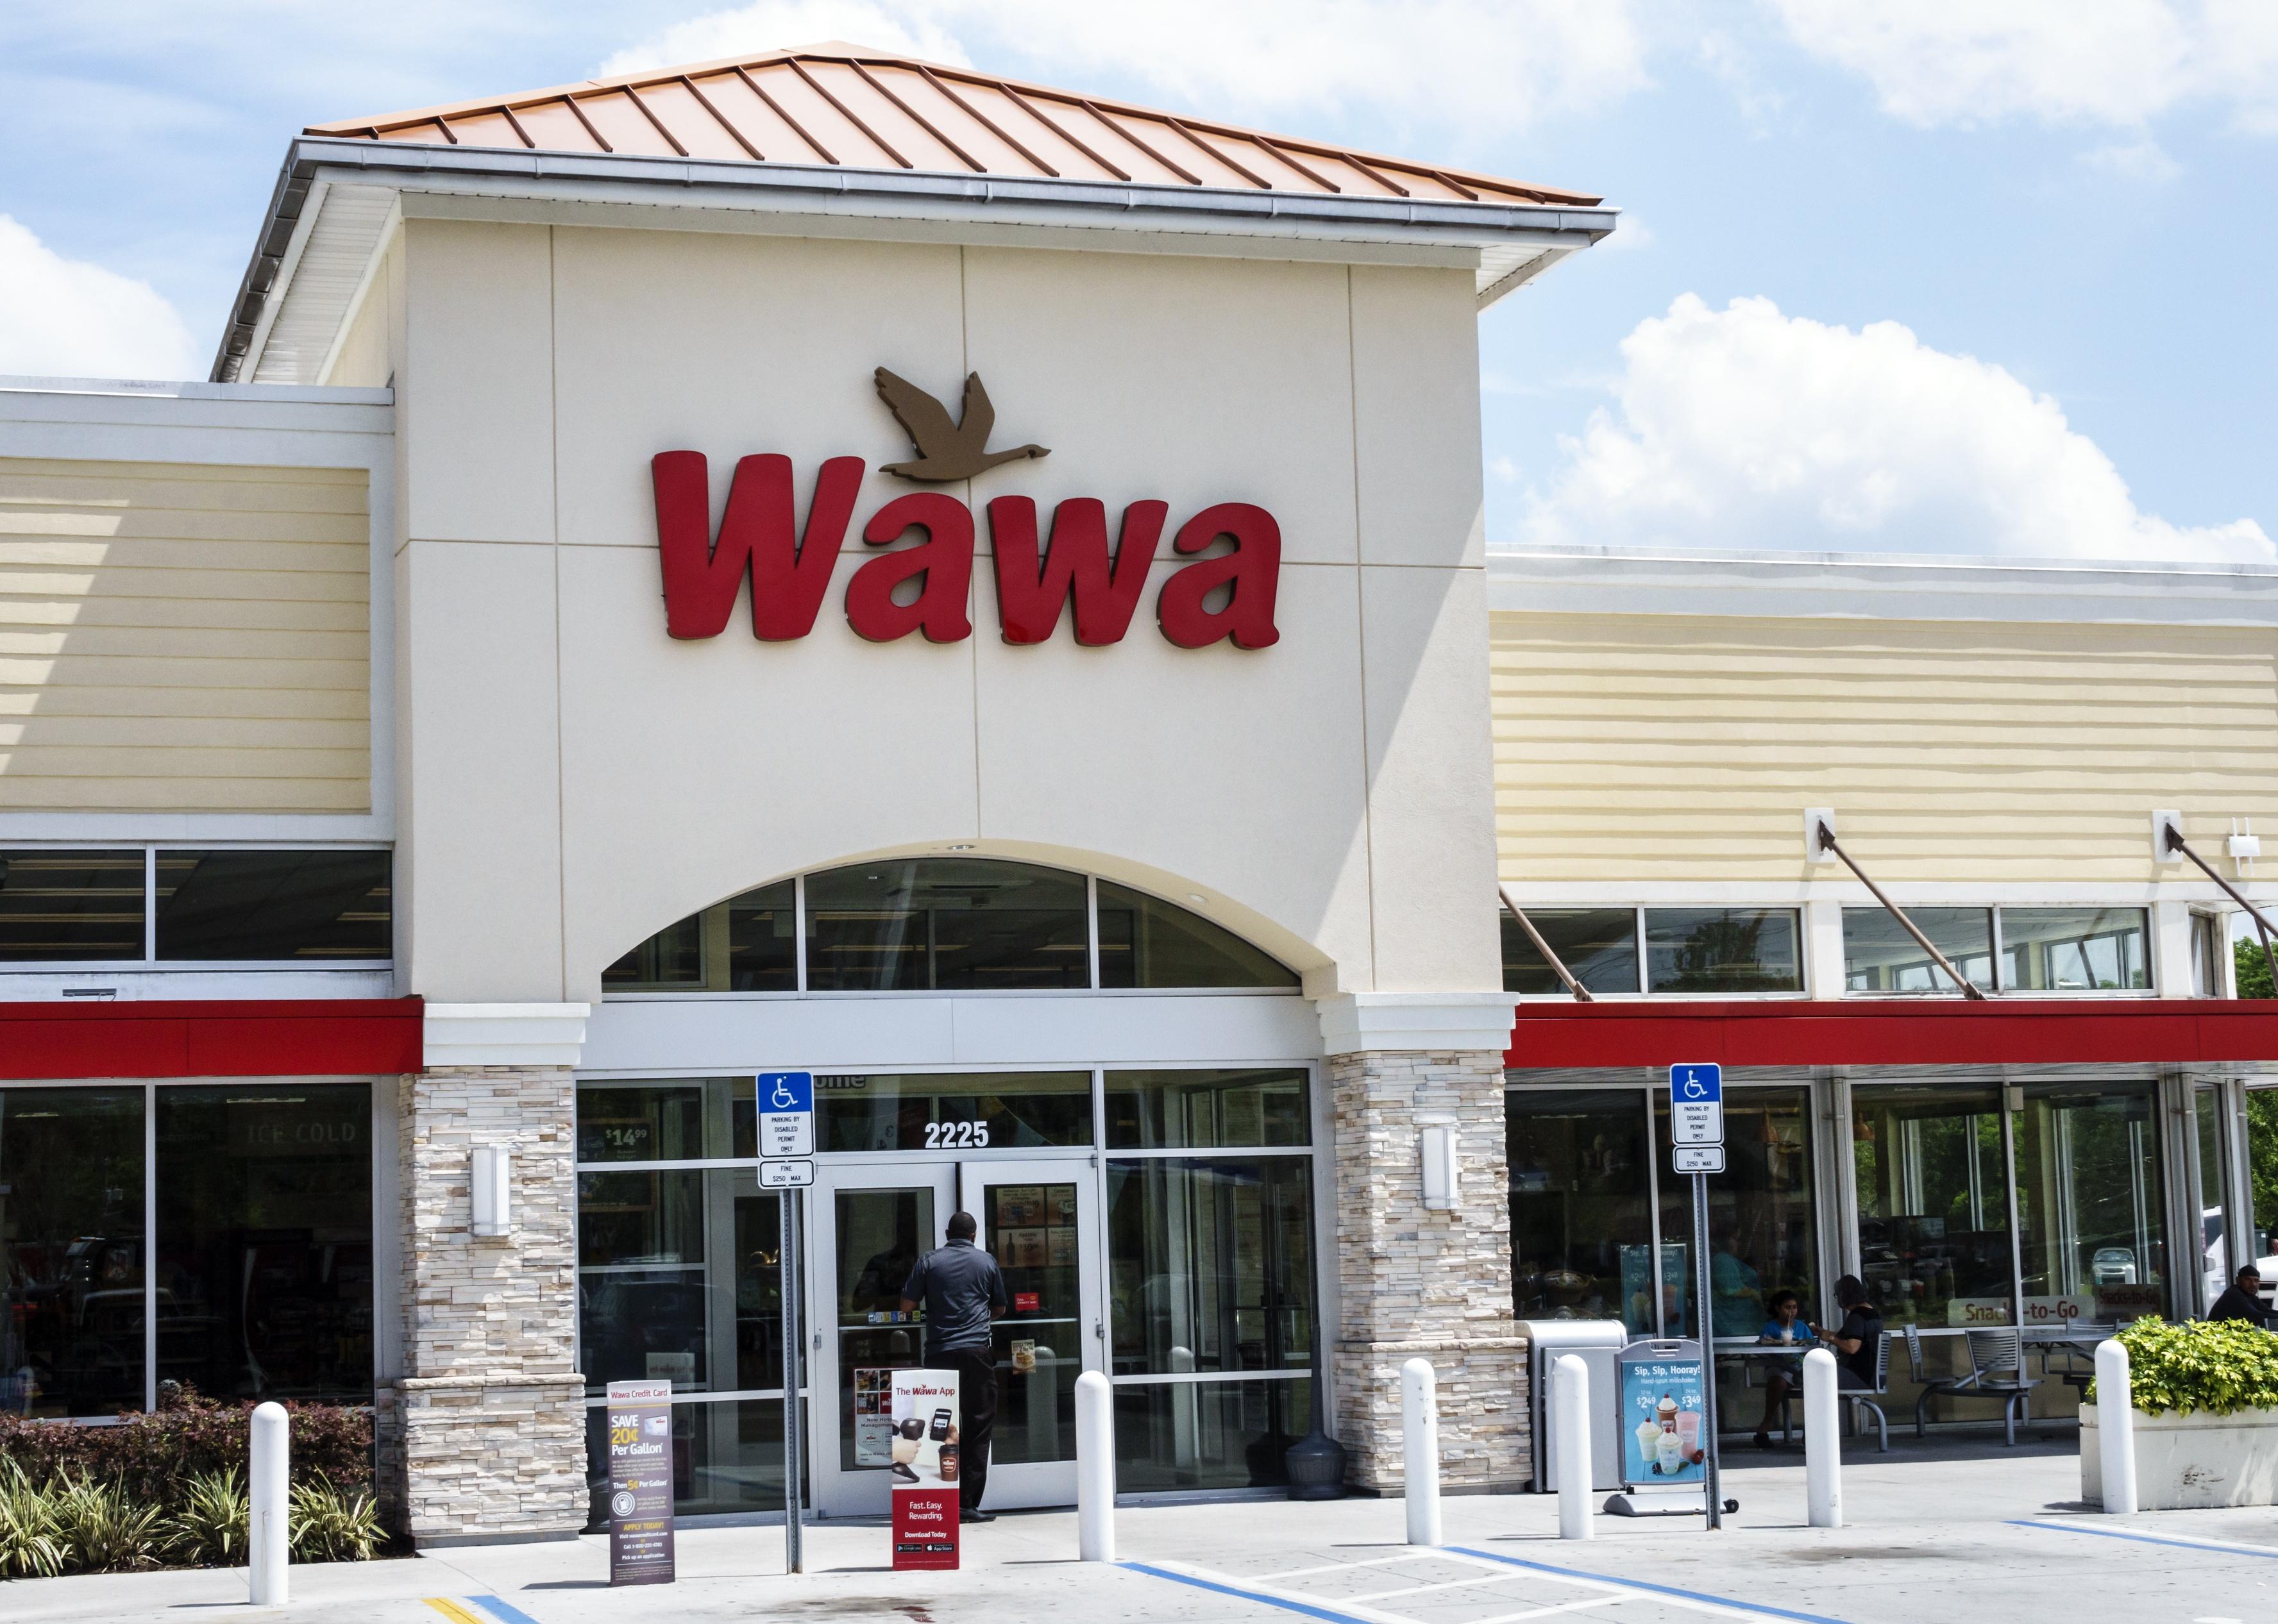 The exterior of a Wawa store.